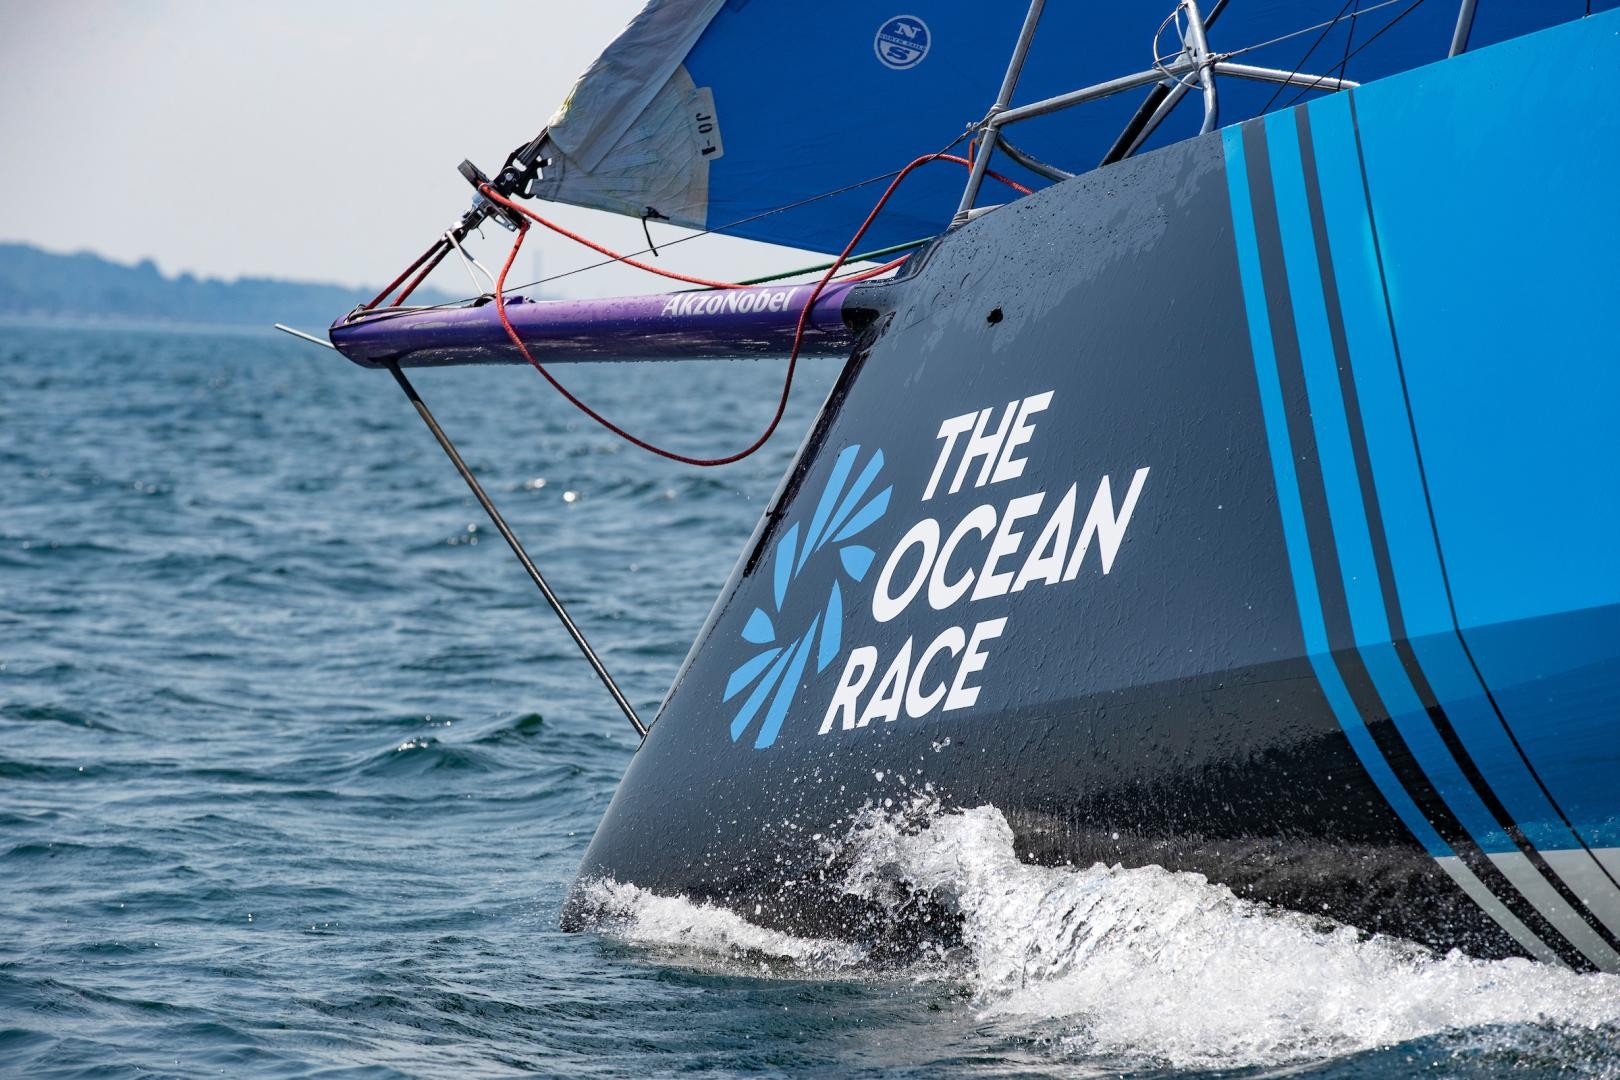 The next edition of The Ocean Race will start in 2022